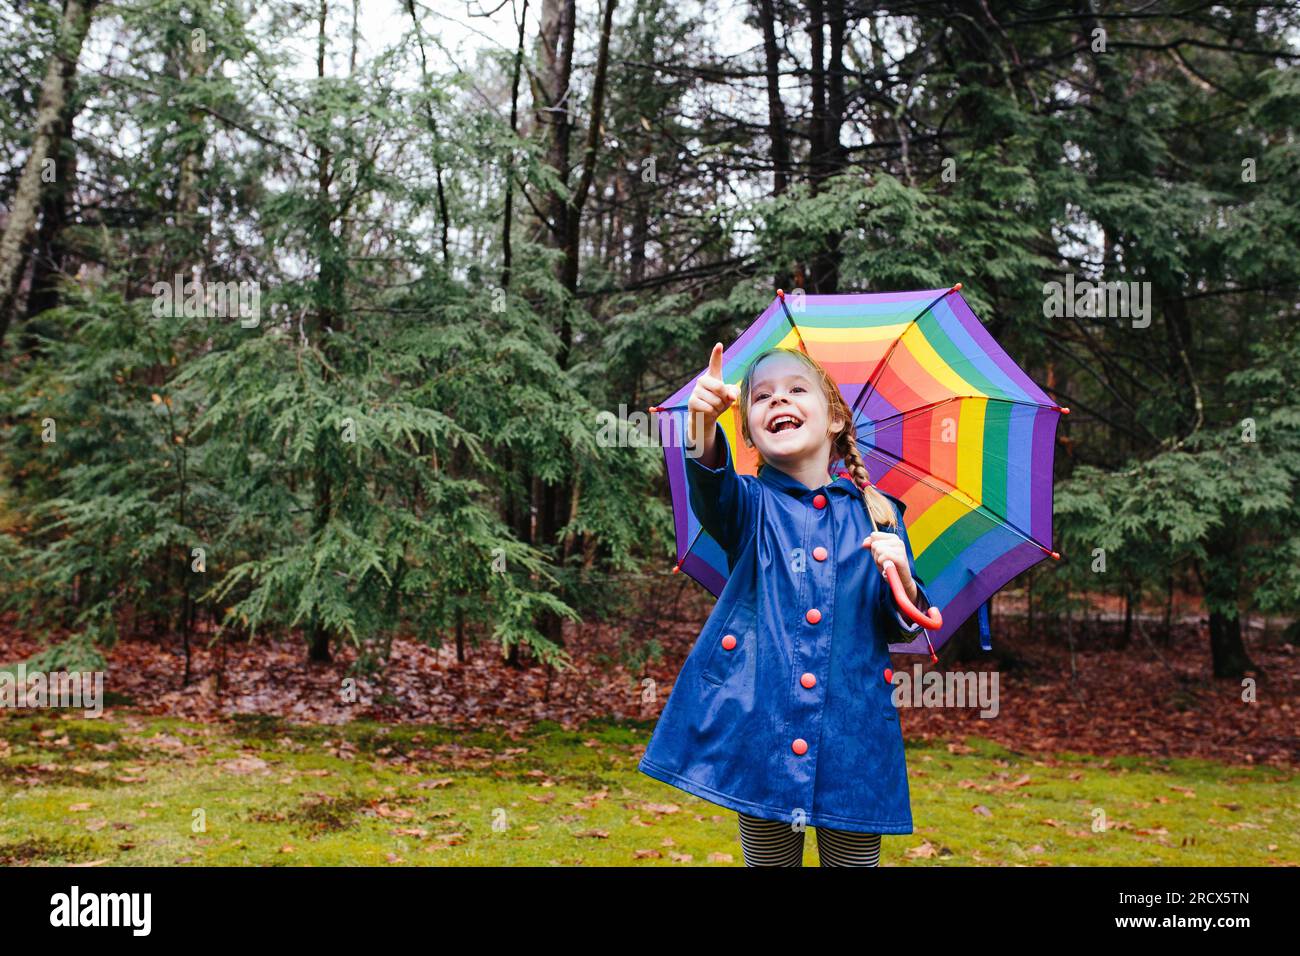 Young girl holding umbrella in a forest, pointing and smiling Stock Photo